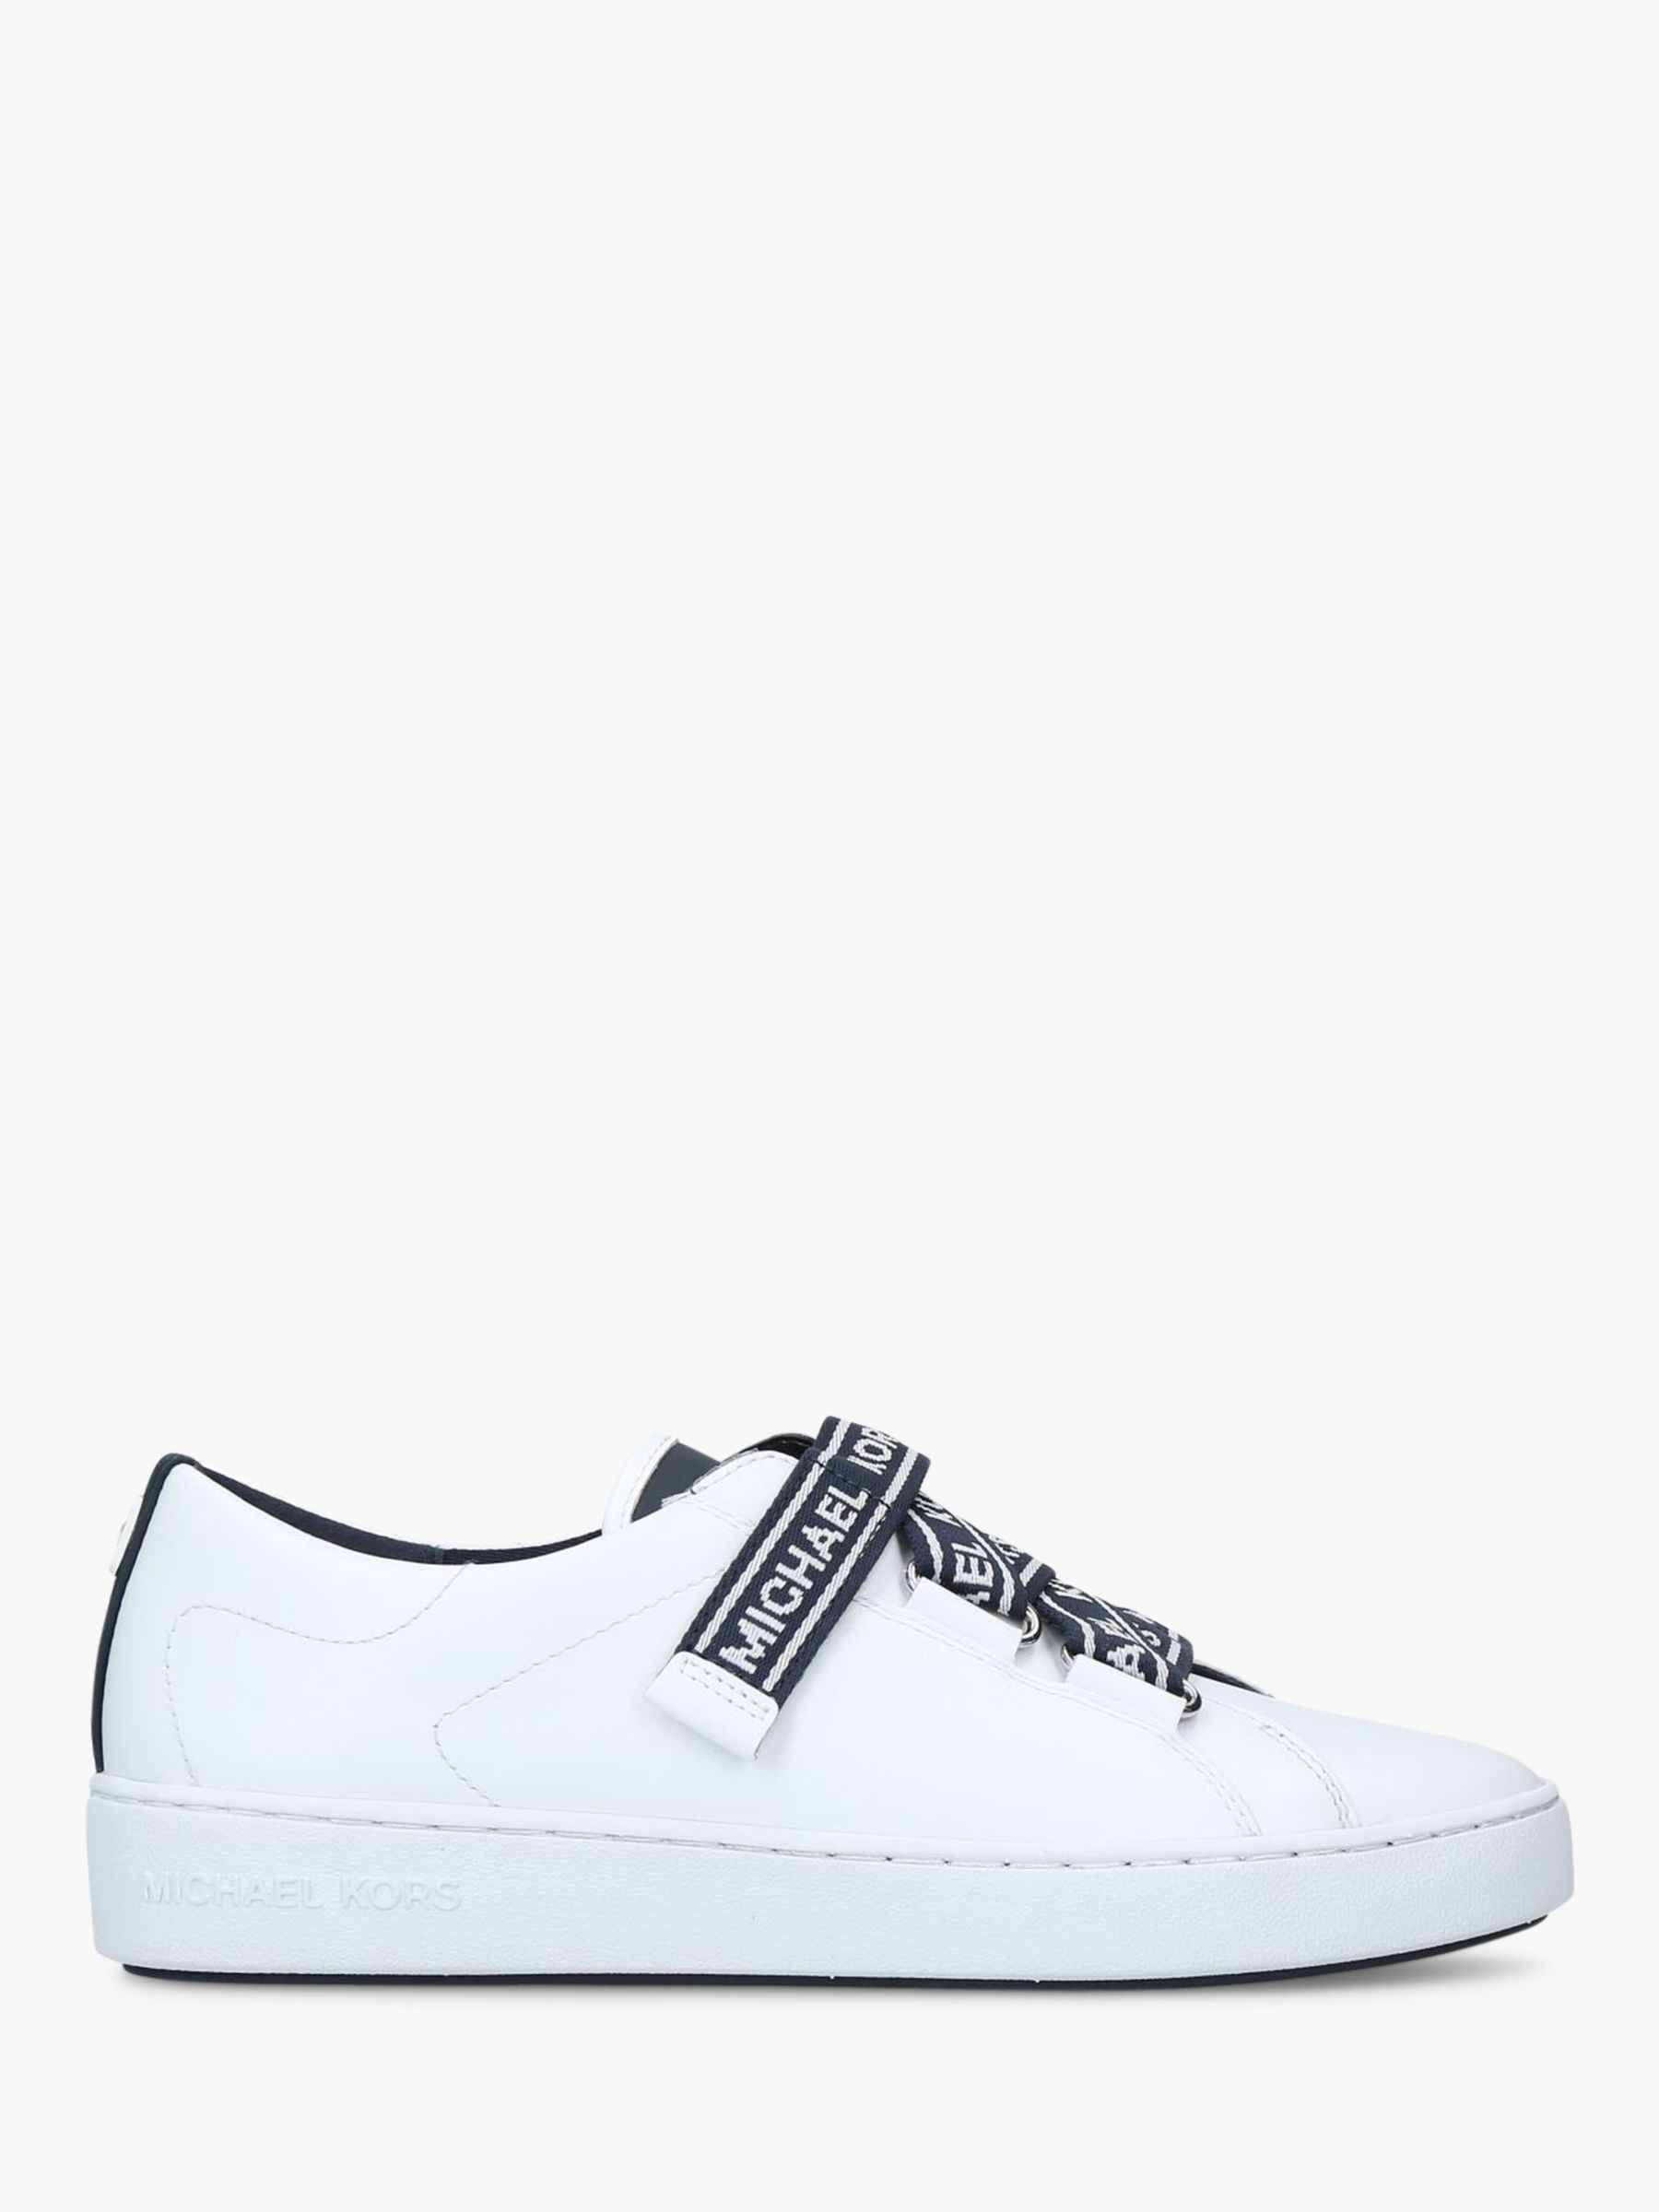 MICHAEL Michael Kors Casey Slip-On Trainers, White Leather